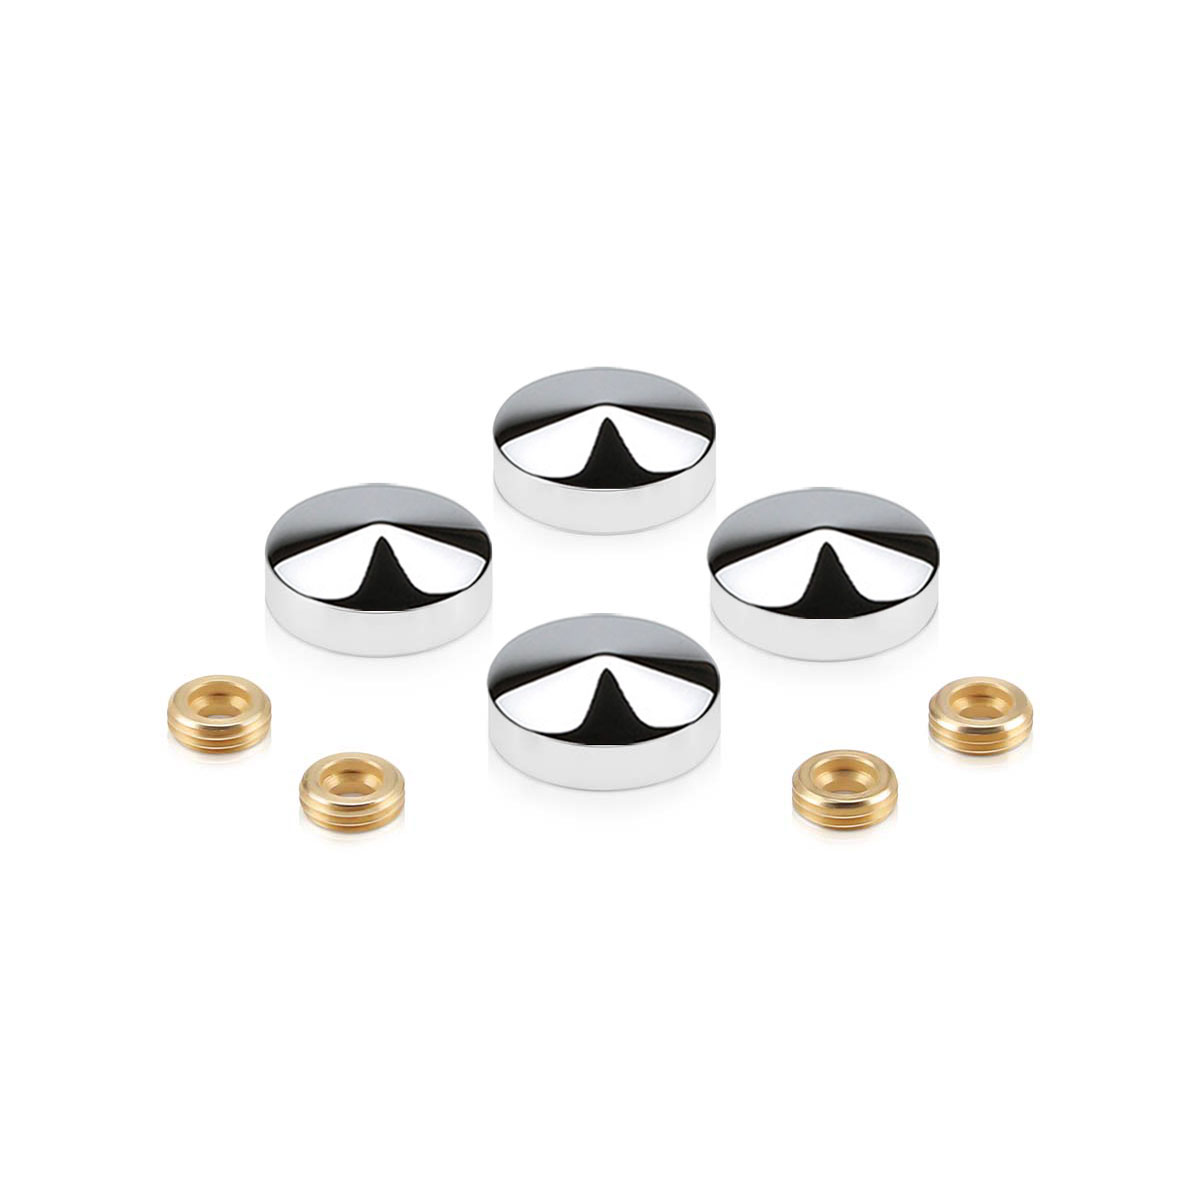 Set of Conical Screw Cover Diameter 7/8'', Polished Stainless Steel Finish (Indoor Use Only)